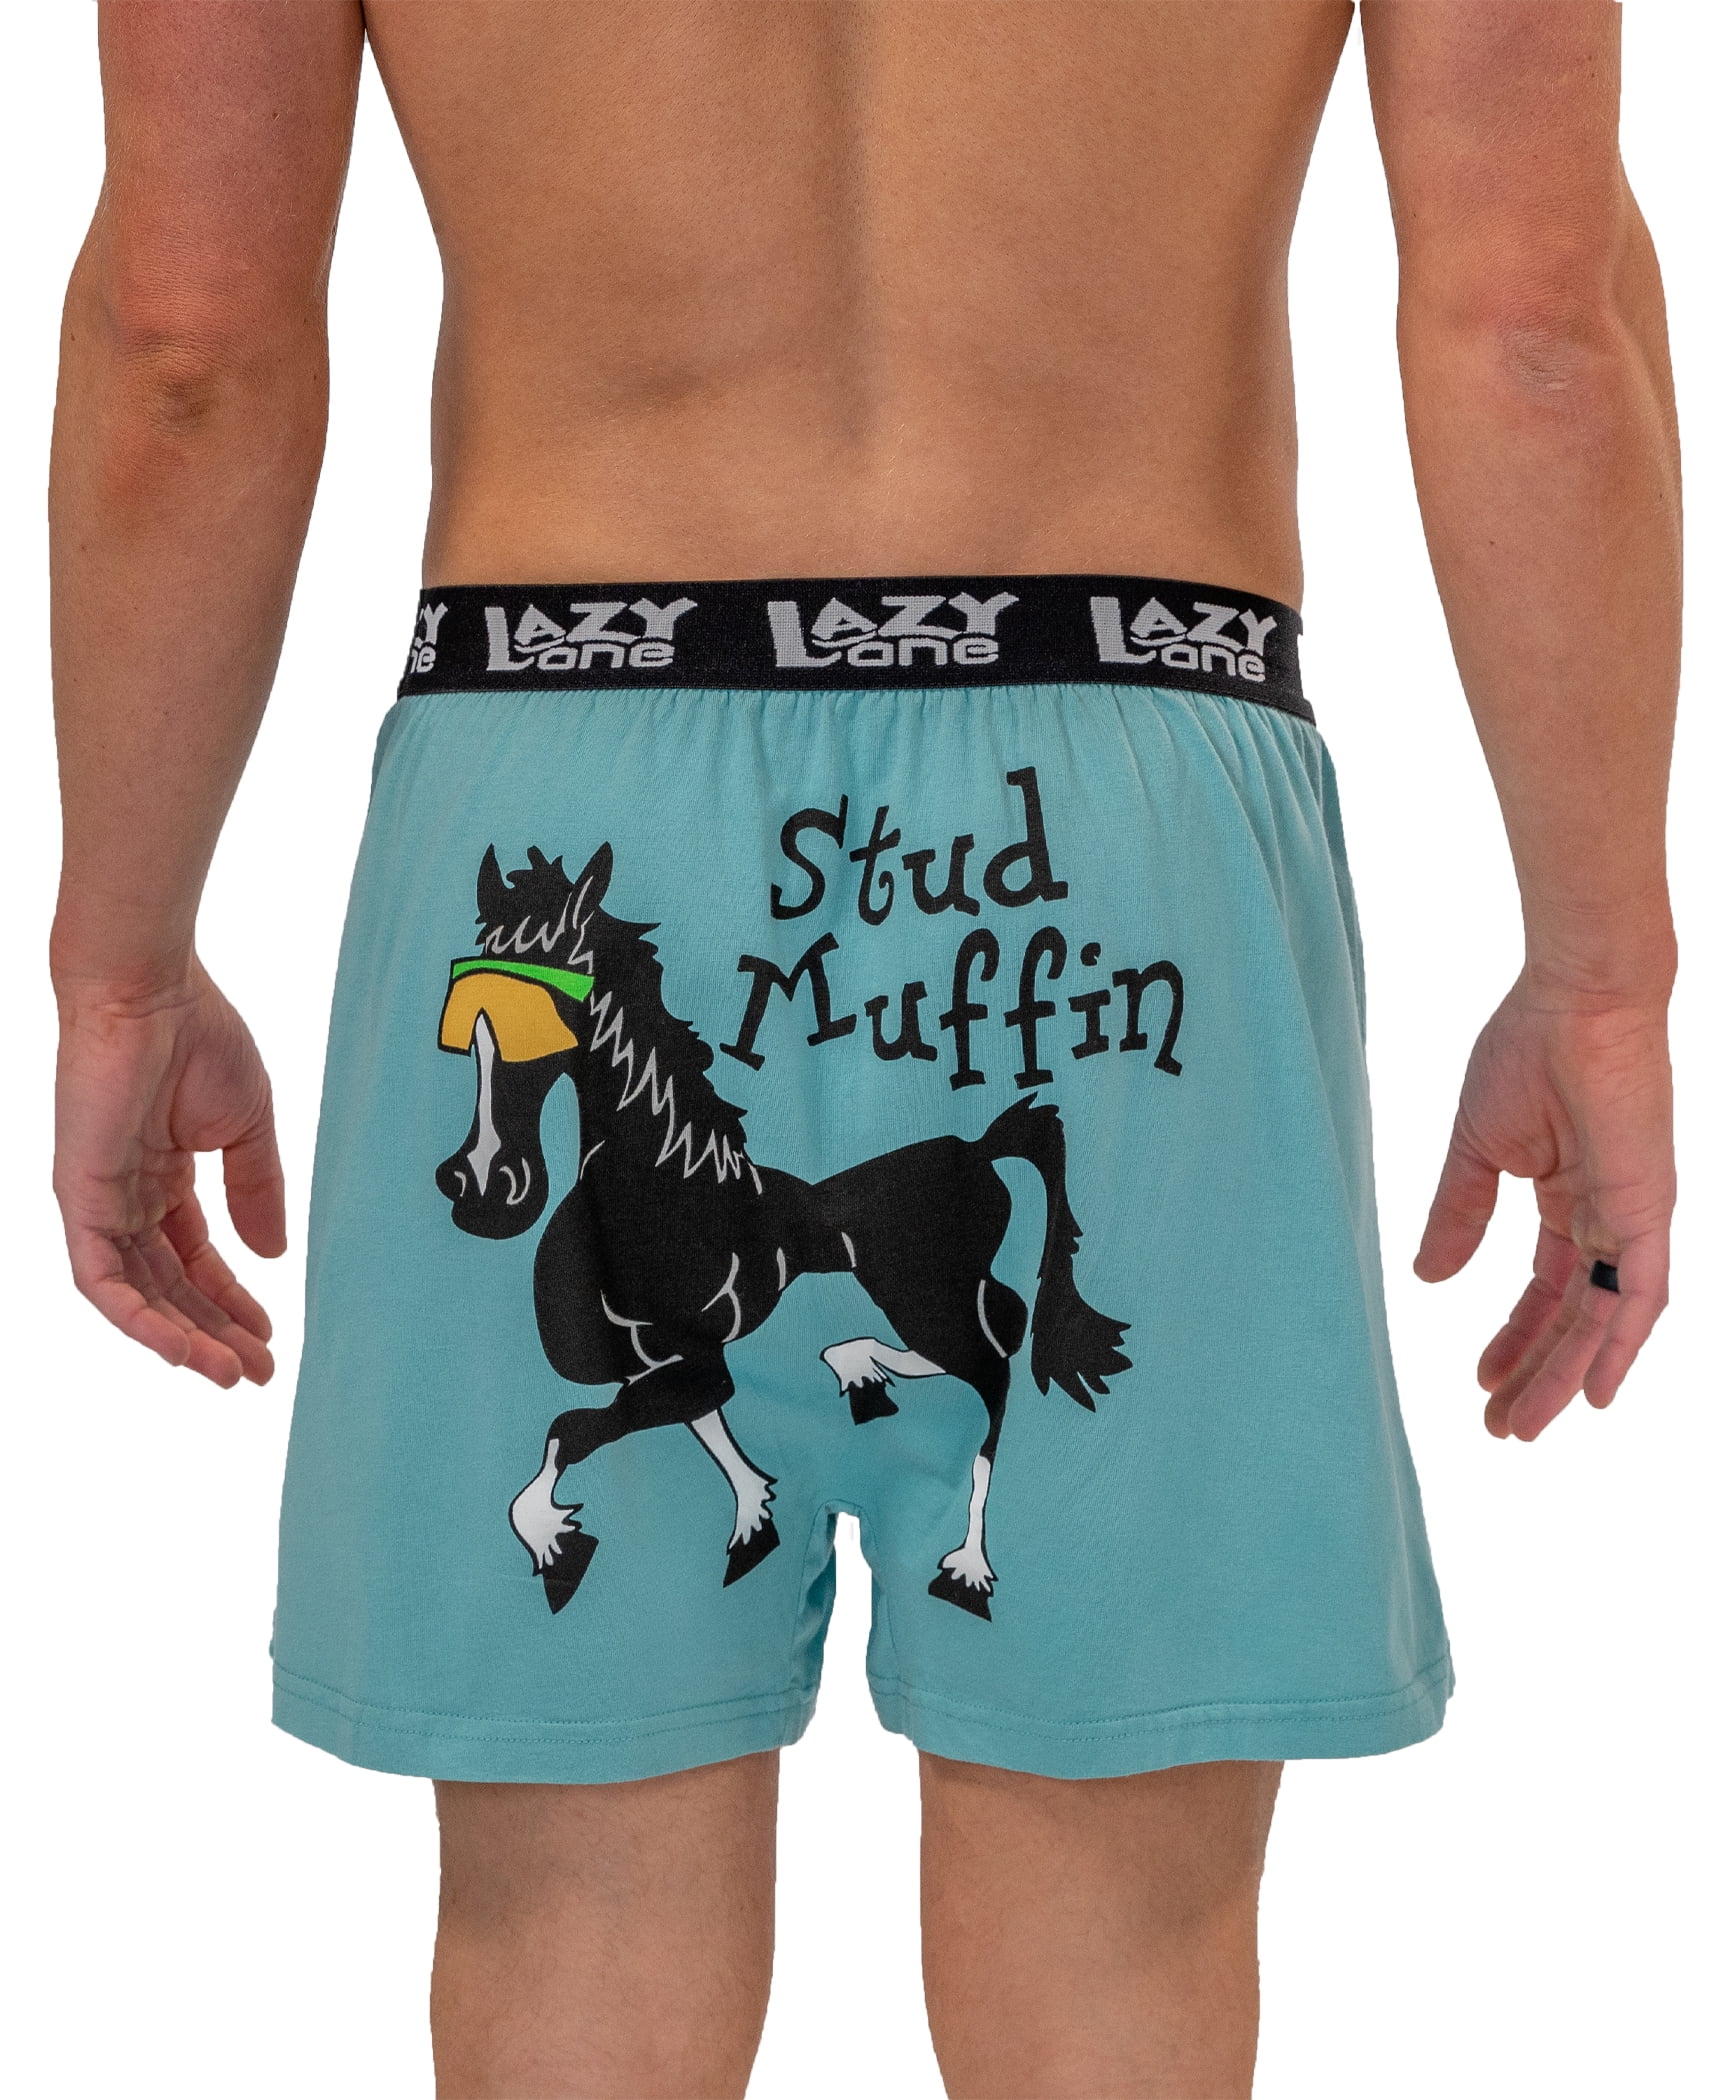 LazyOne Funny Animal Boxers, Stud Muffin, Humorous Underwear, Gag Gifts for  Men (Xlarge) 